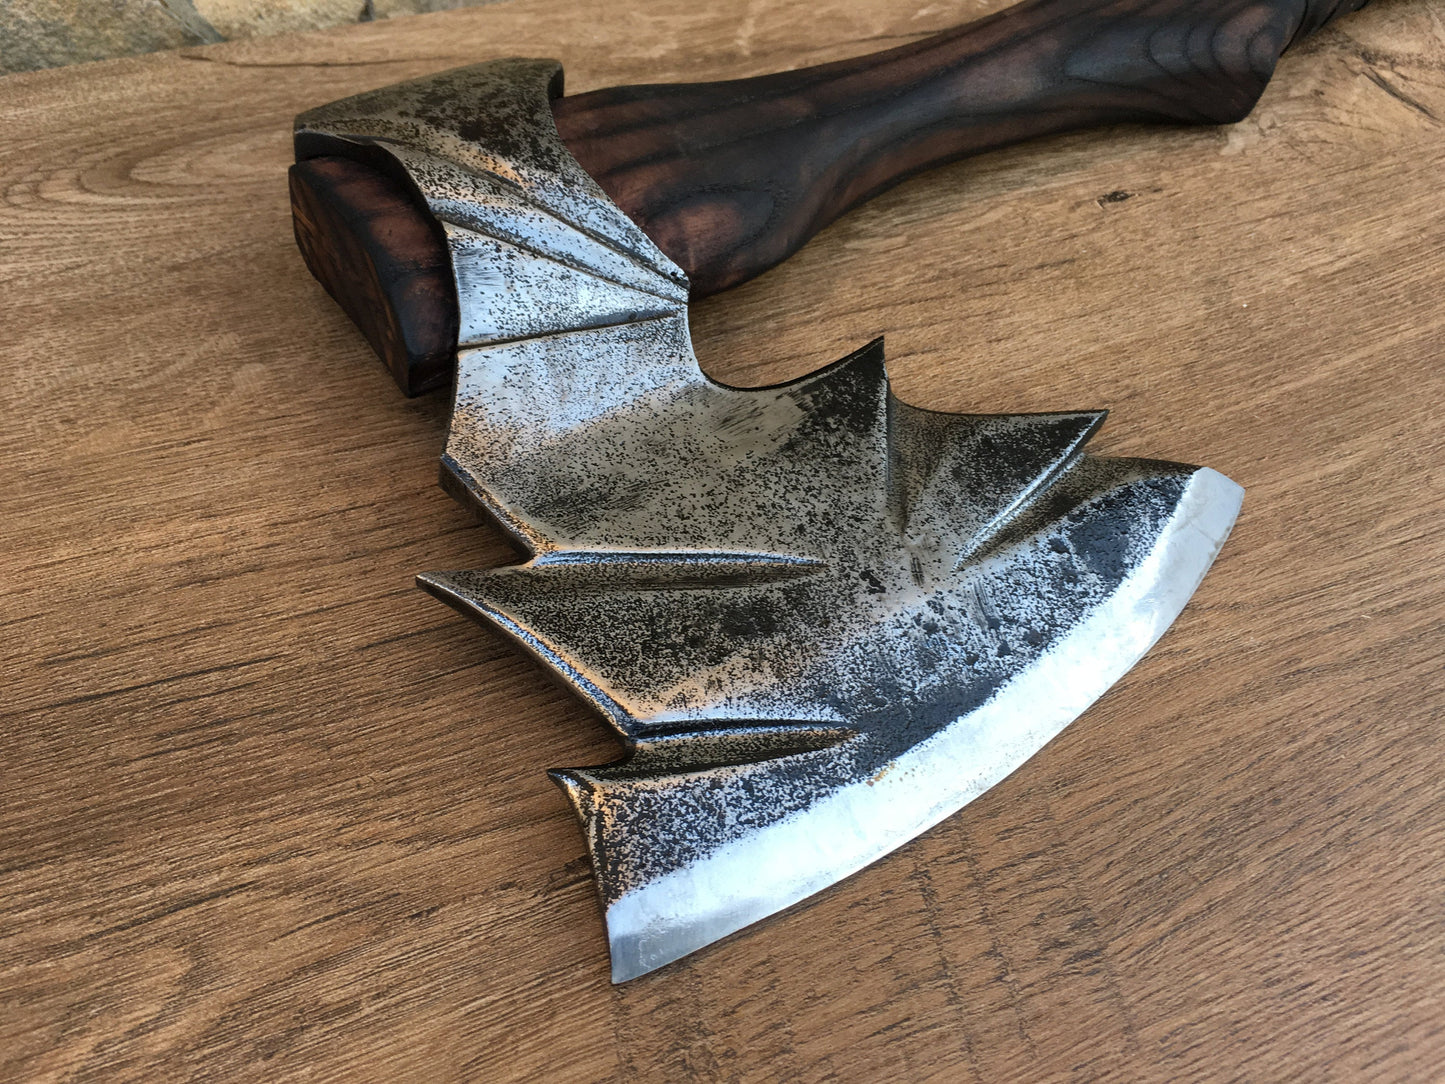 Viking axe, his birthday gift, tomahawk, hatchet, mens gifts, medieval axe, viking camp, Norse axe, axe gift, viking gifts, iron gifts, axes